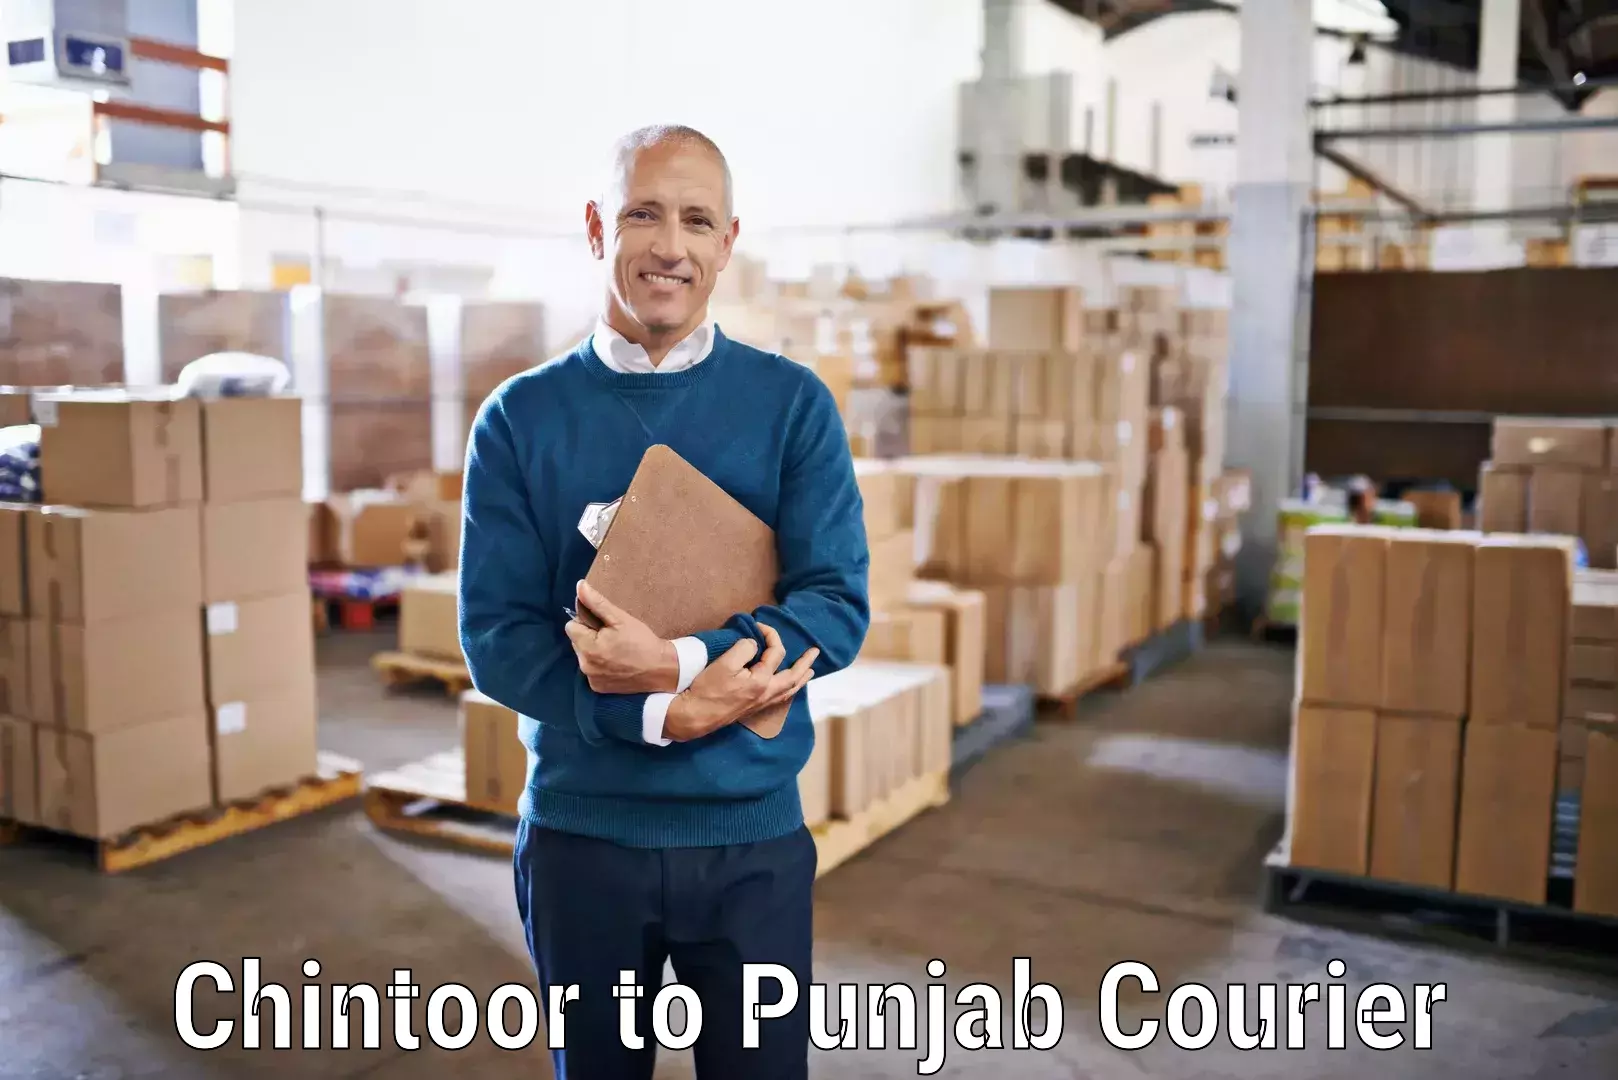 Fast-track shipping solutions Chintoor to Fatehgarh Sahib